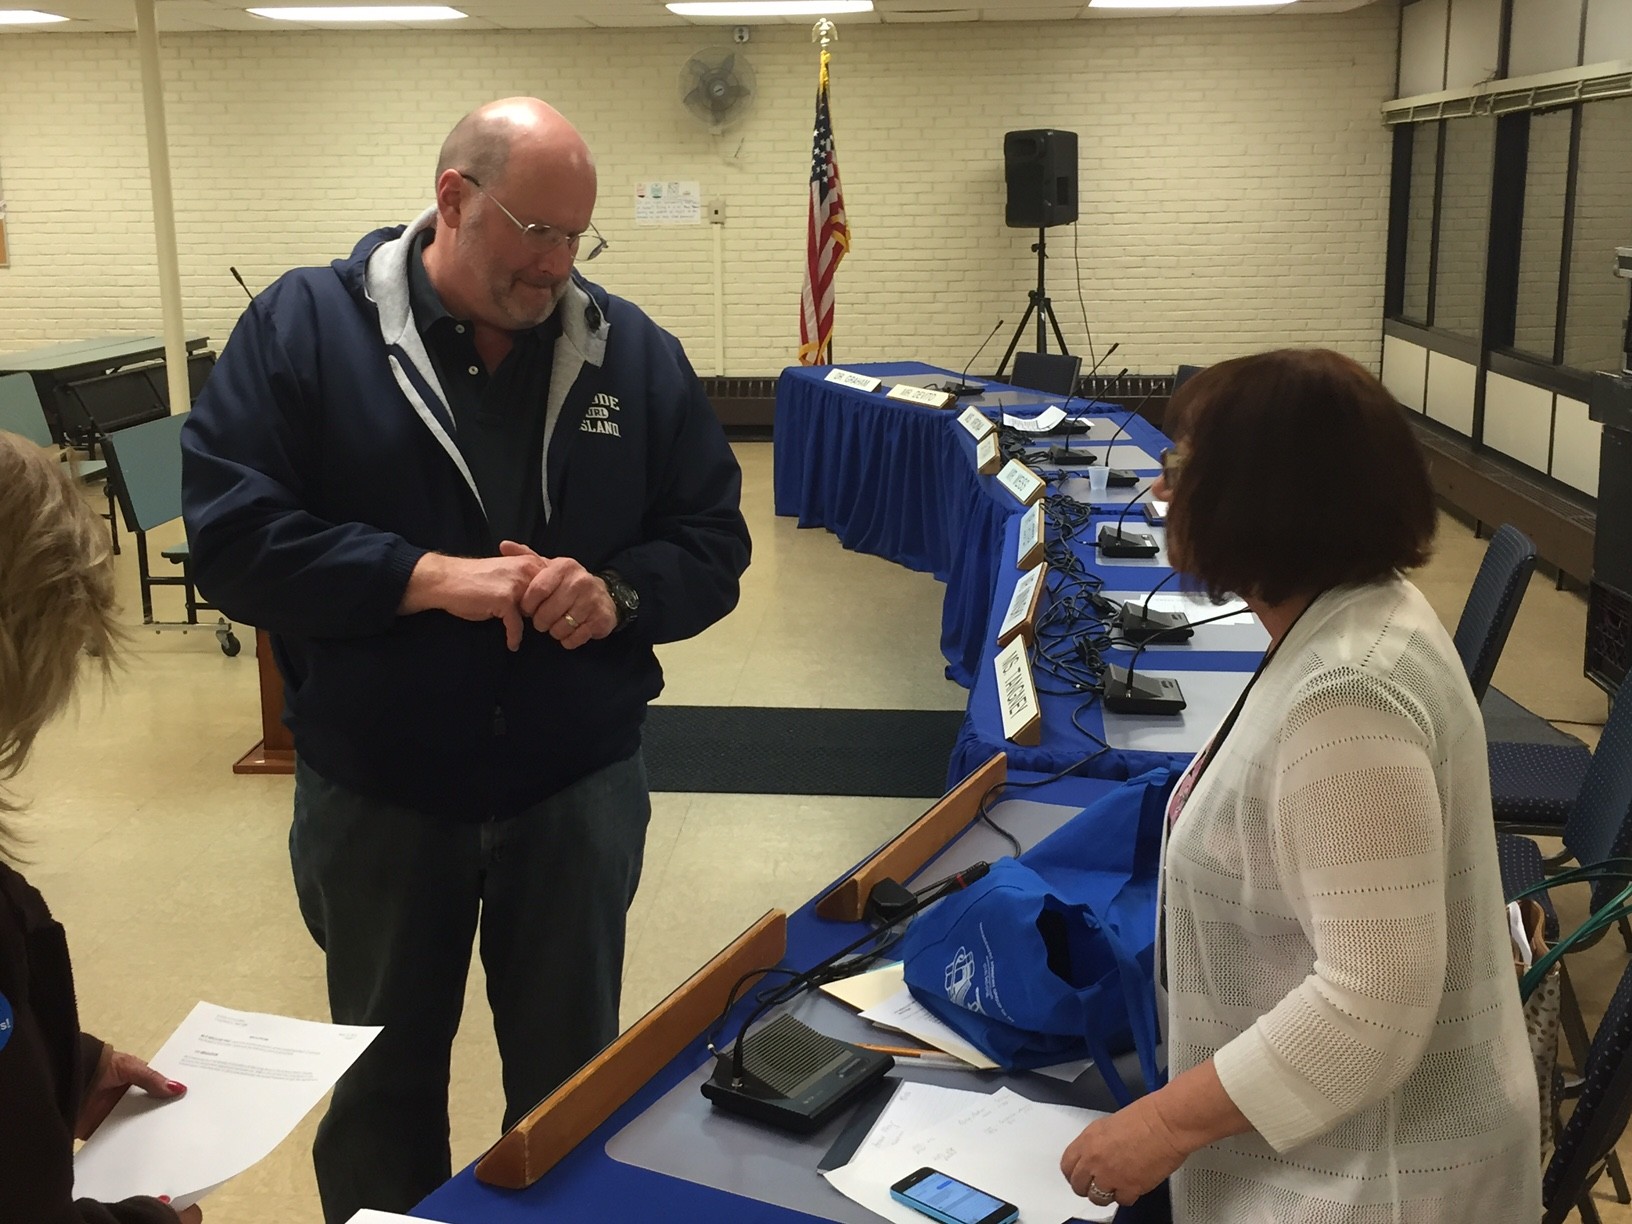 Perry Bodnar, left, met with District Clerk Carol Butler, who announced his victory in the school board election minutes earlier on Tuesday night.